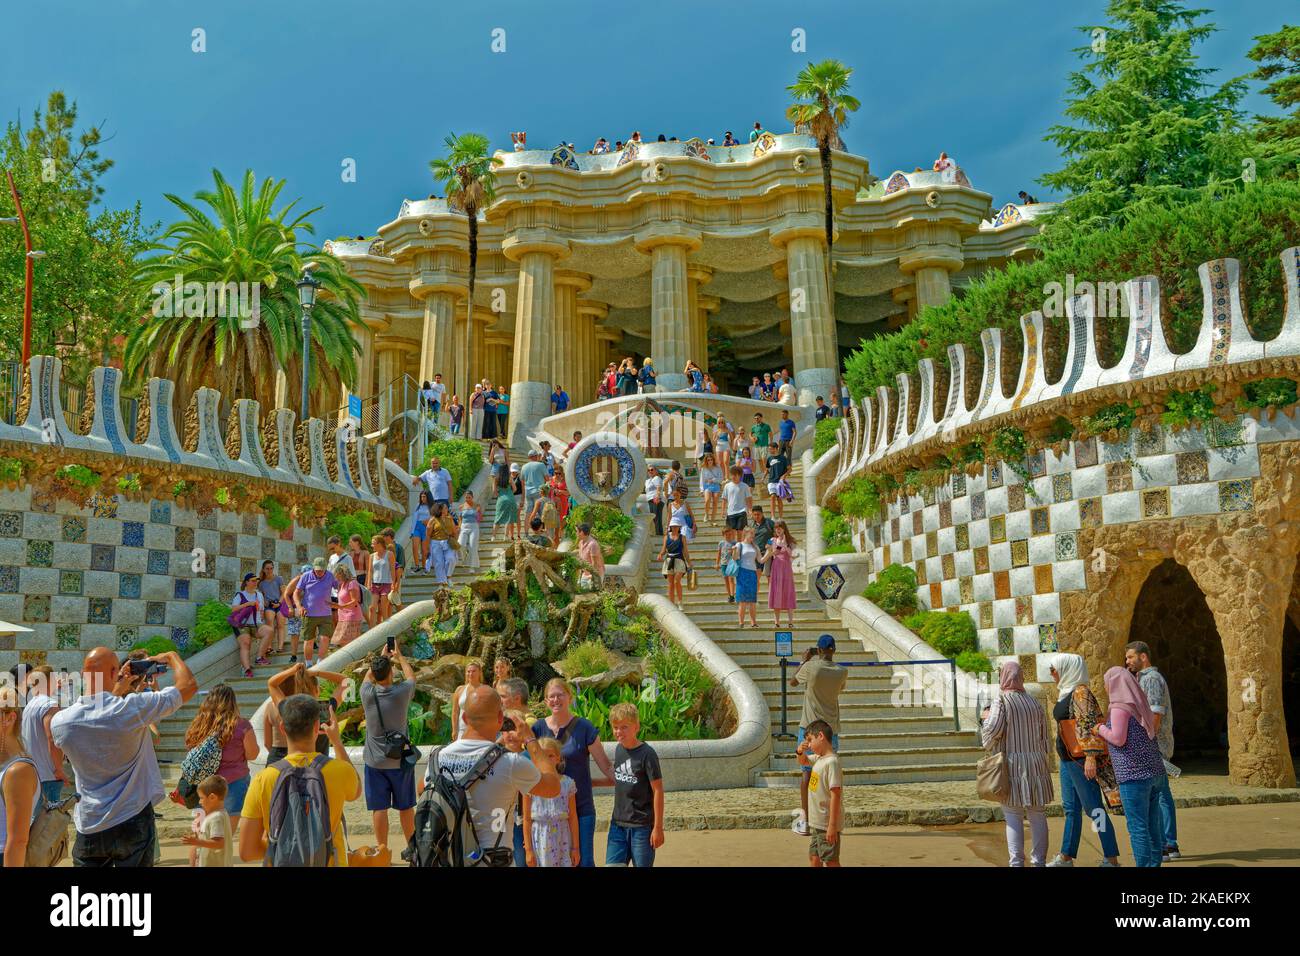 Park Guell, the Gaudi created design park in Barcelona, Spain. Stock Photo